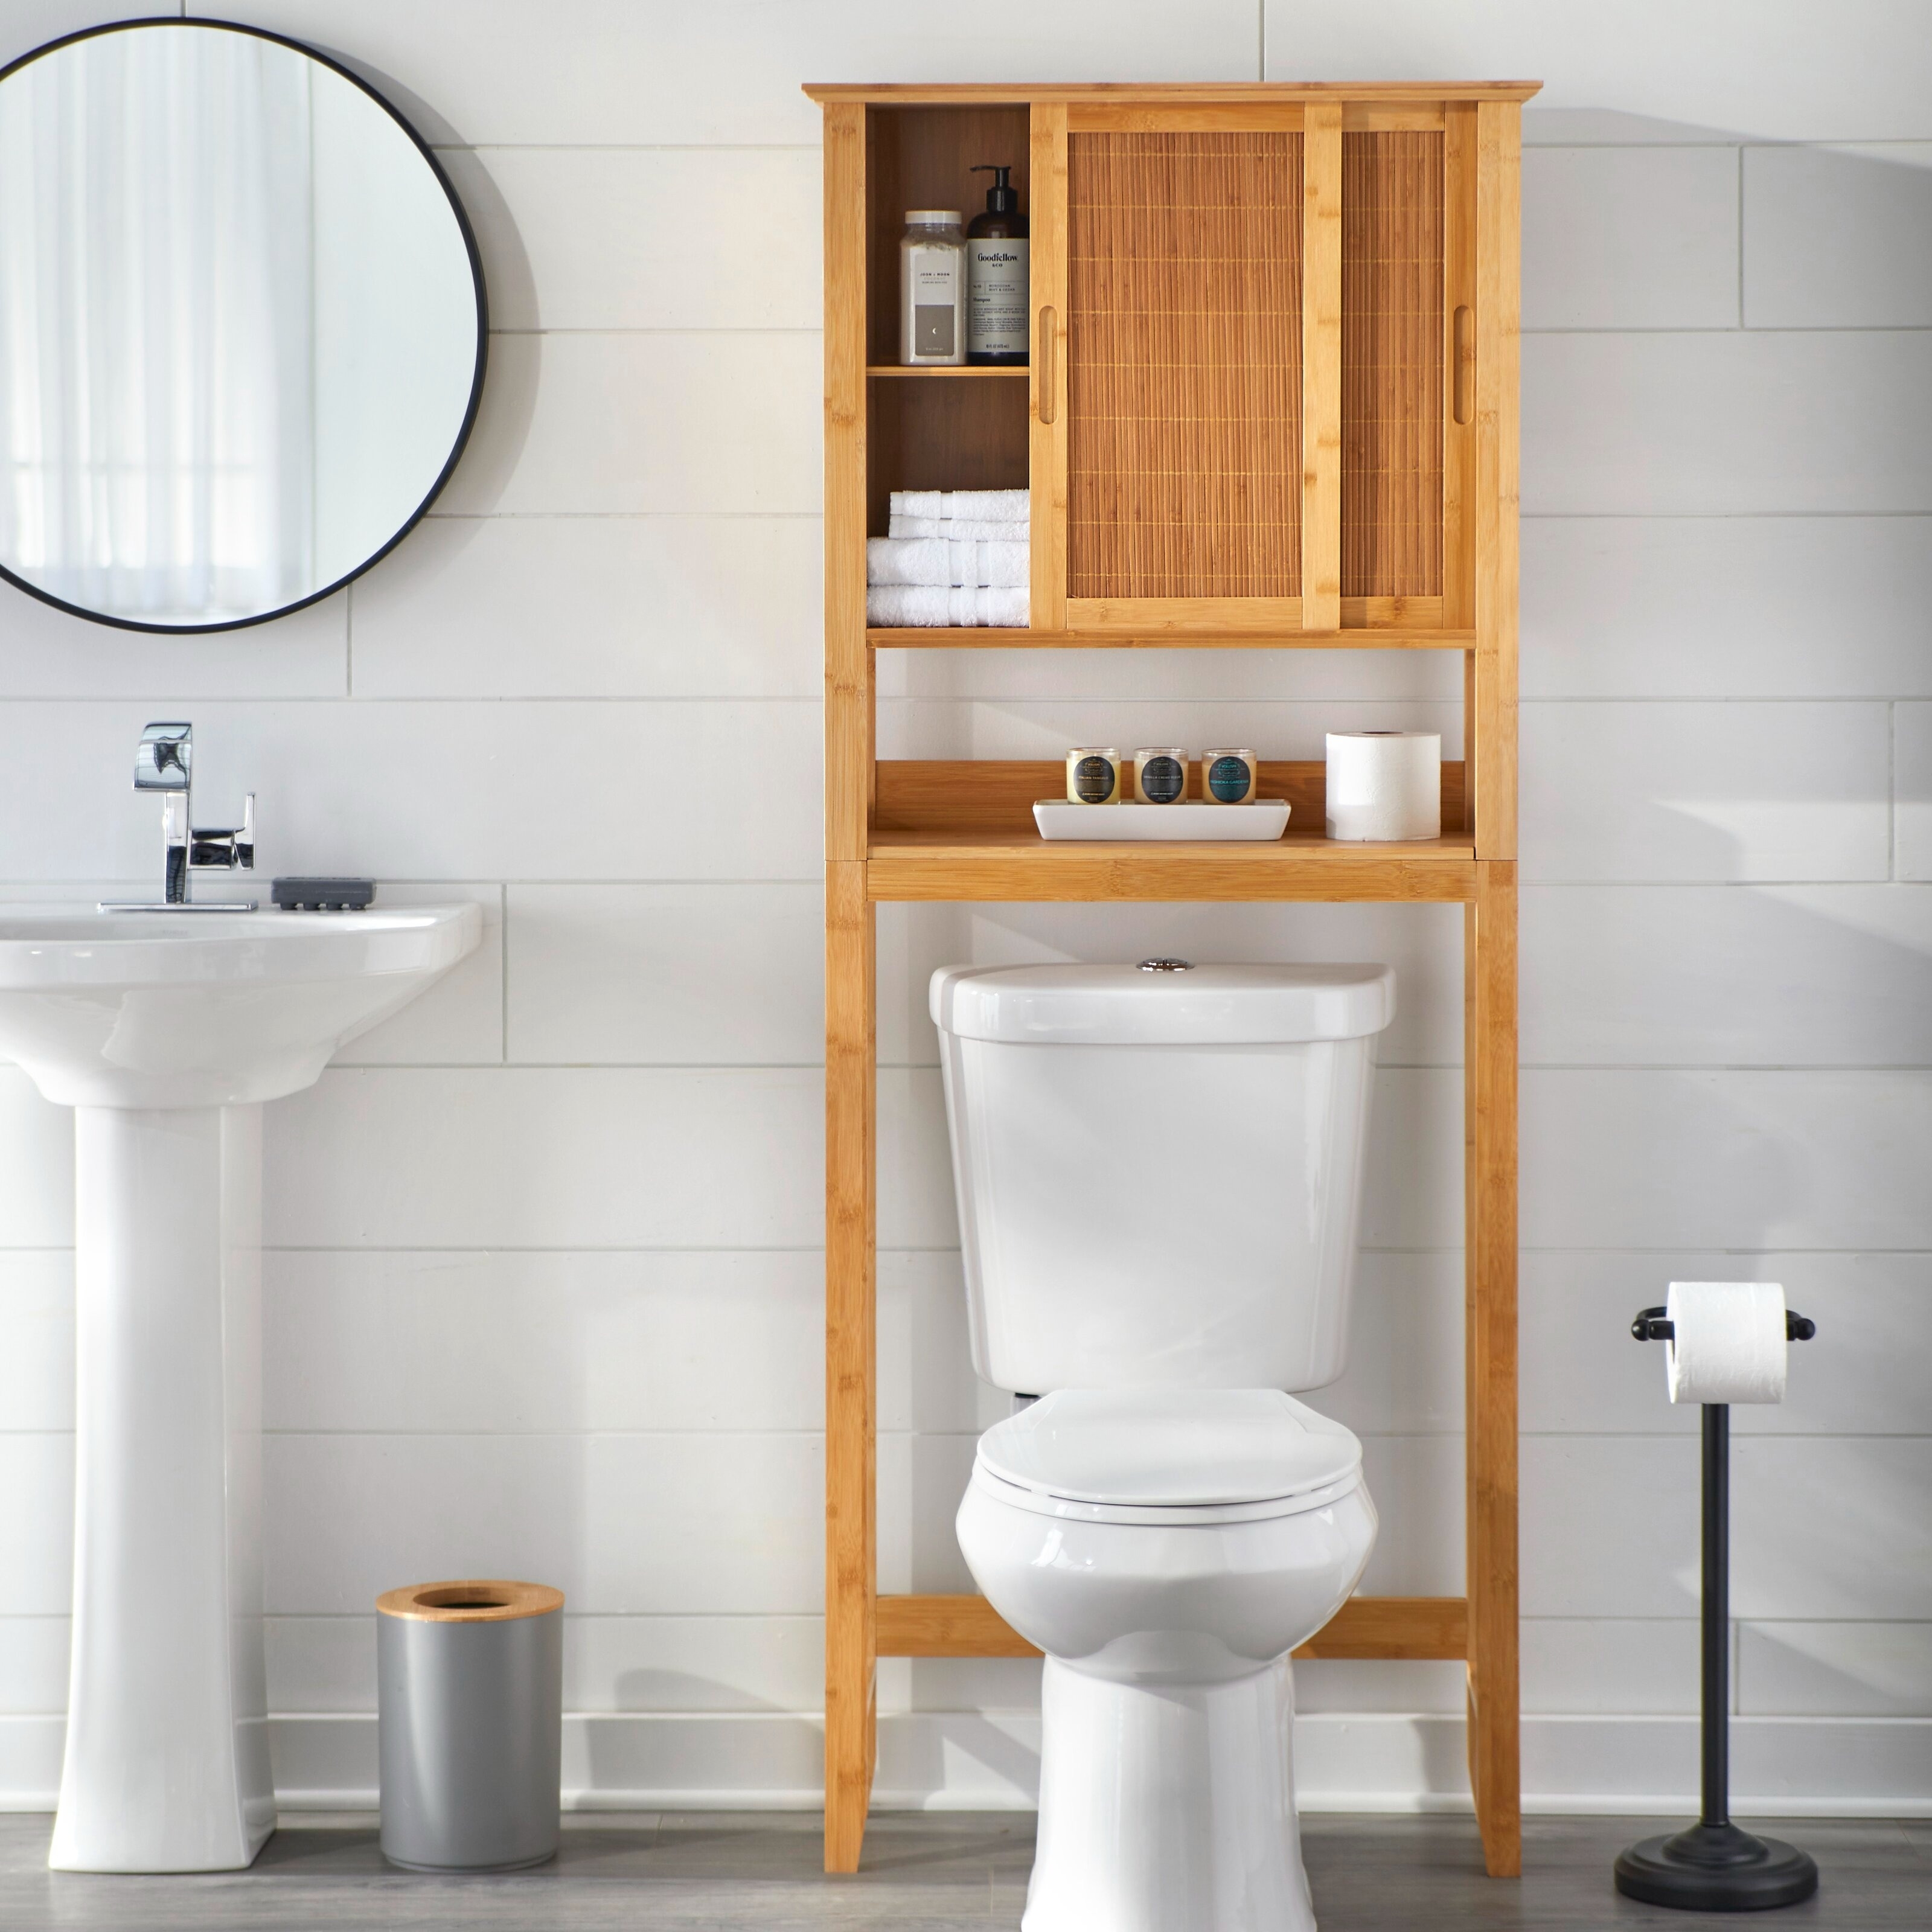 A modern bathroom with a toilet, sink, mirror, and wooden storage cabinet